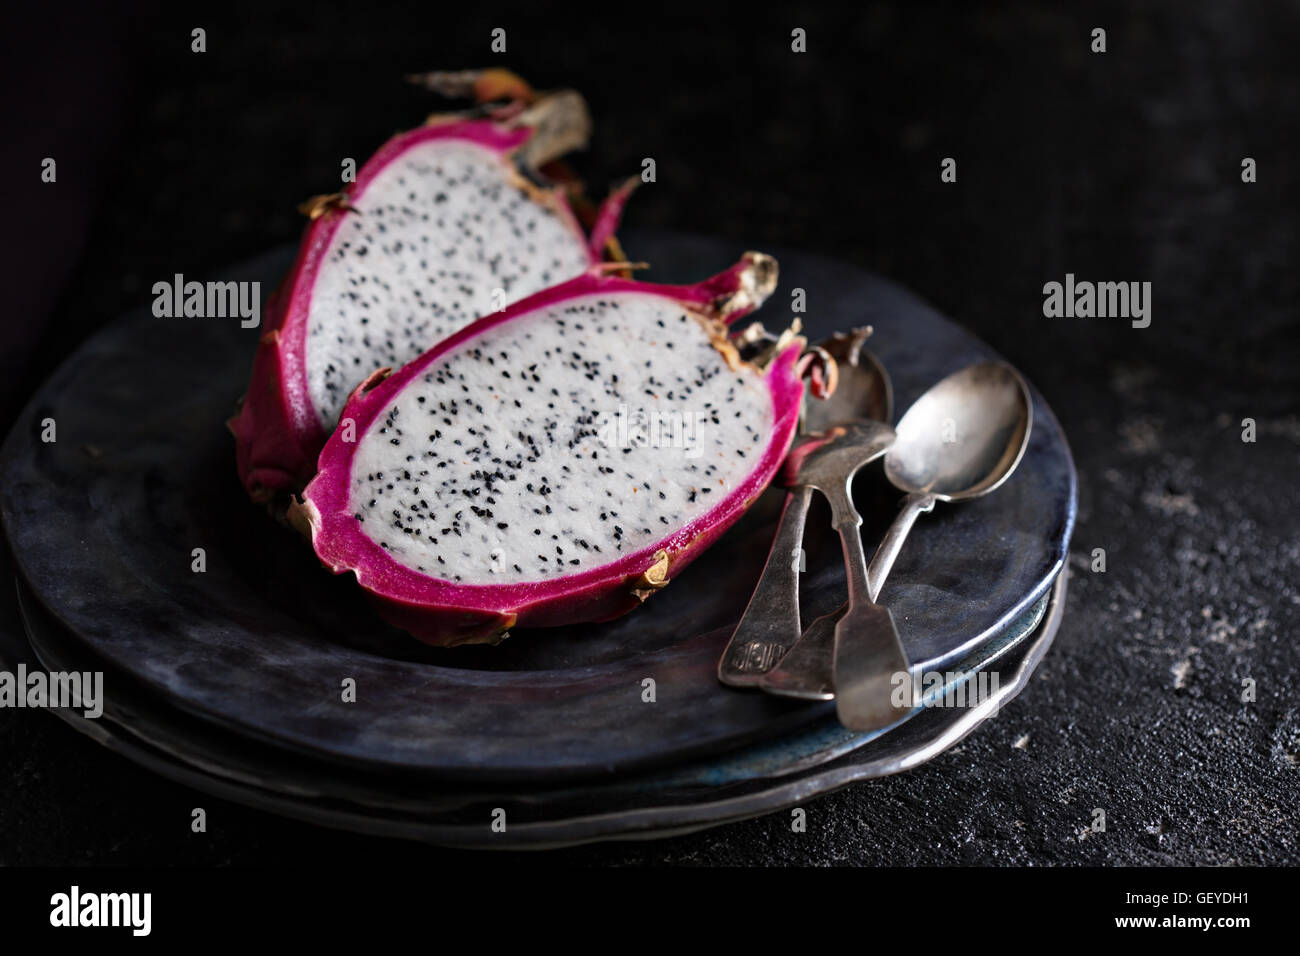 Dragon fruit cut open on a plate Stock Photo